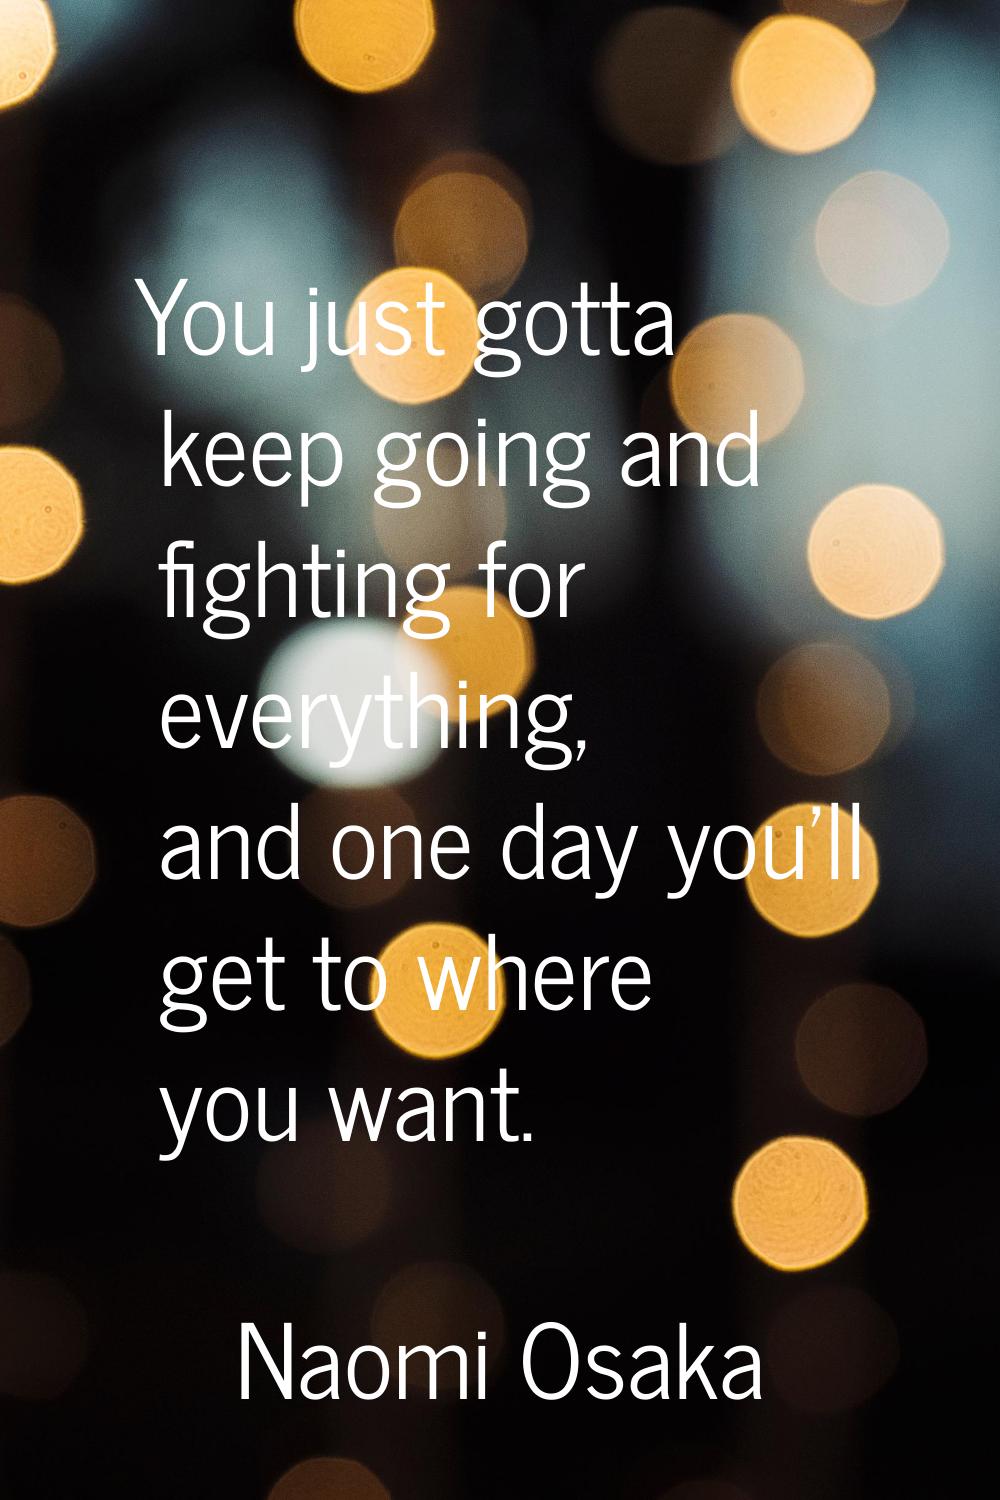 You just gotta keep going and fighting for everything, and one day you'll get to where you want.